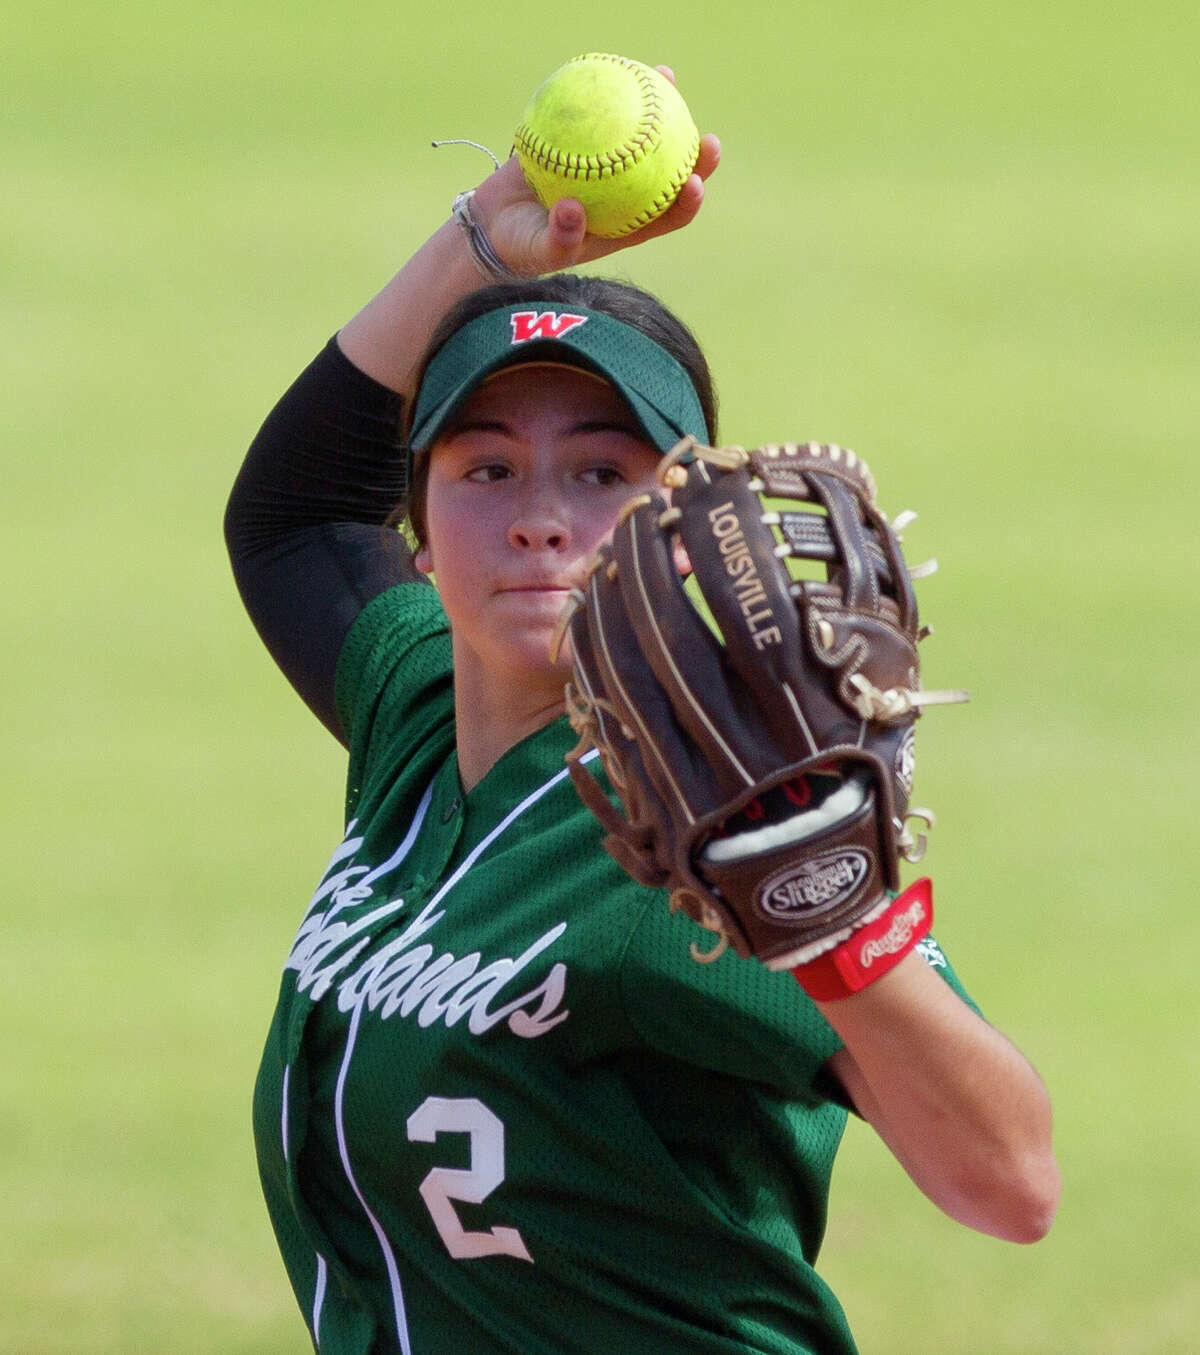 The Woodlands shortstop Abby Jones (2) warms up between innings during a high school softball game at The Woodlands Varsity Round Robin Invitational at The Woodlands High School Friday, Feb. 24, 2017, in The Woodlands.